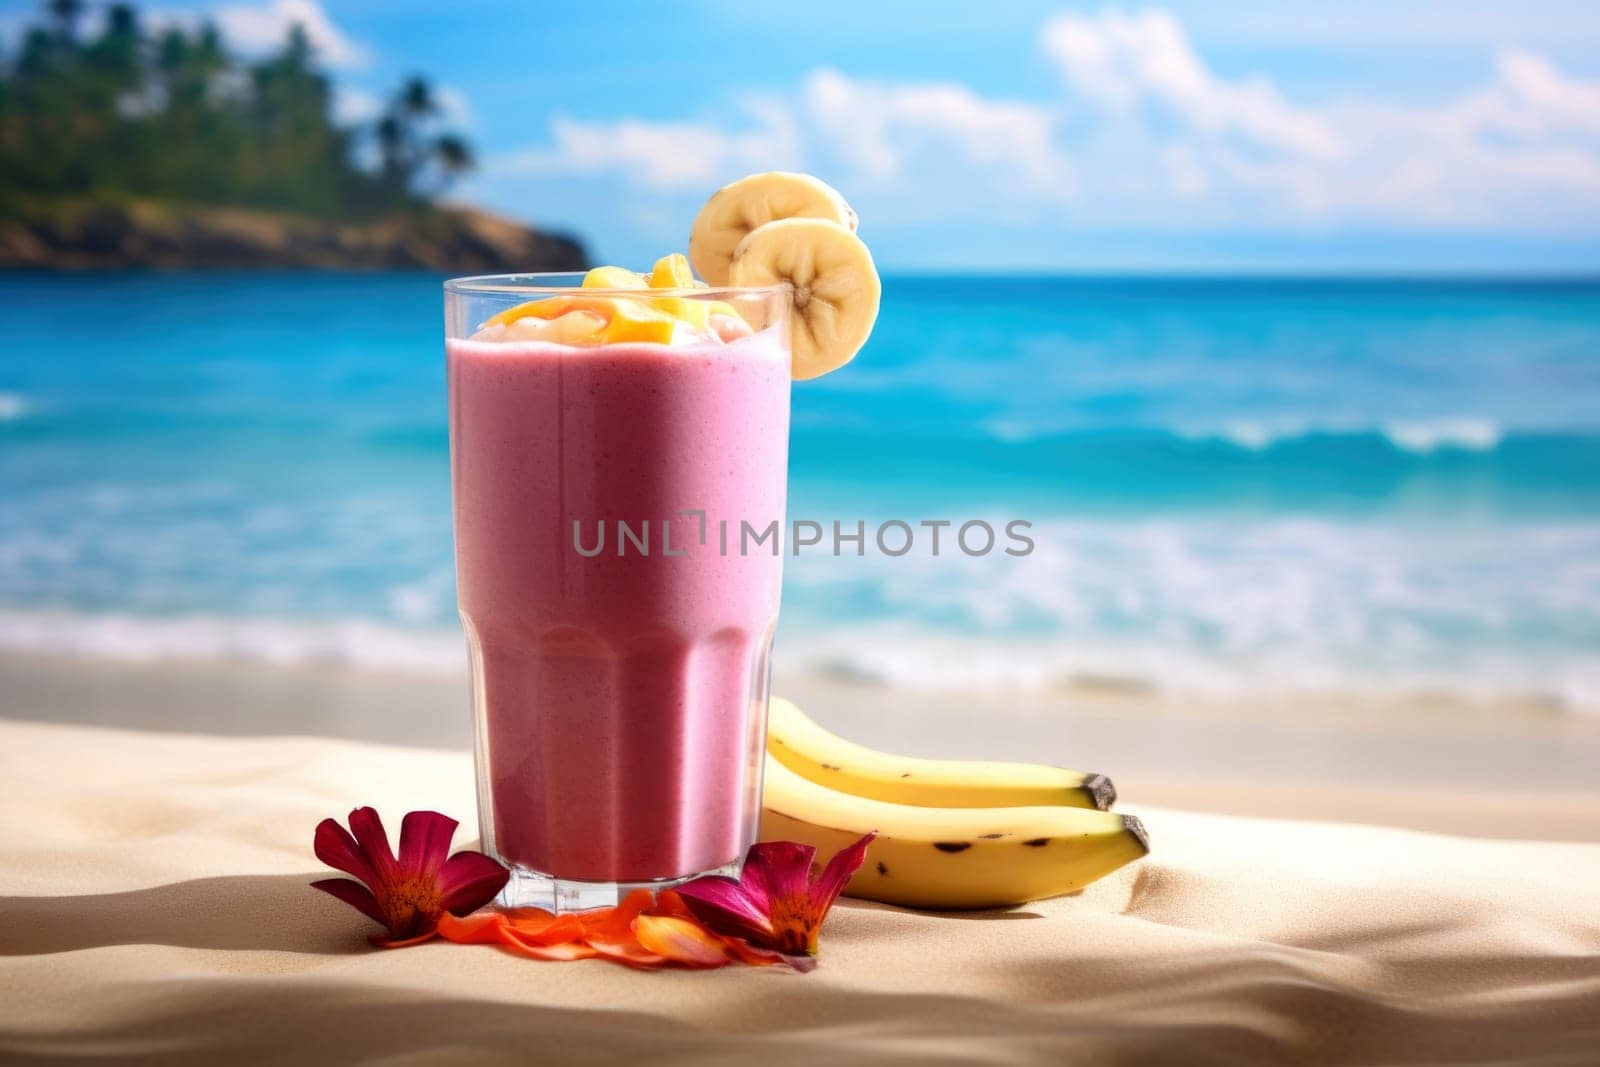 Strawberry banana smoothie on a sandy beach with ocean backdrop